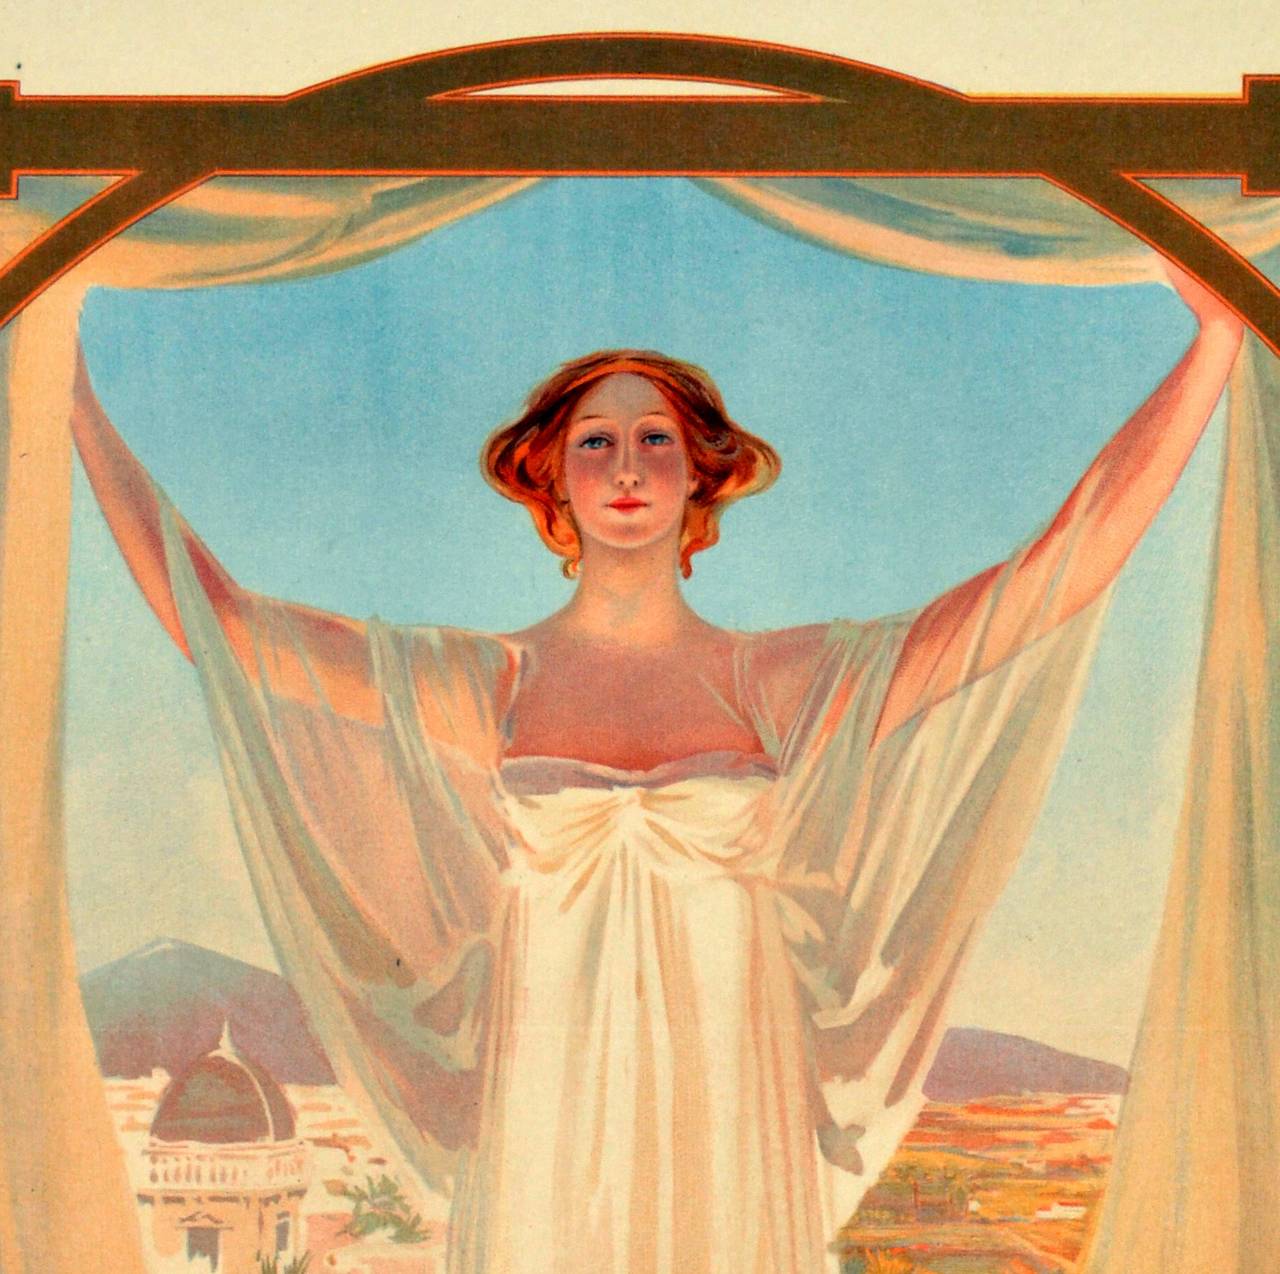 Original vintage travel advertising poster for Nelson Line cruises to Argentina (Sunny South) and Brazil. Stunning Art Nouveau style image of a lady opening curtains to reveal a city and mountains behind her with a cruise liner below on the sea and